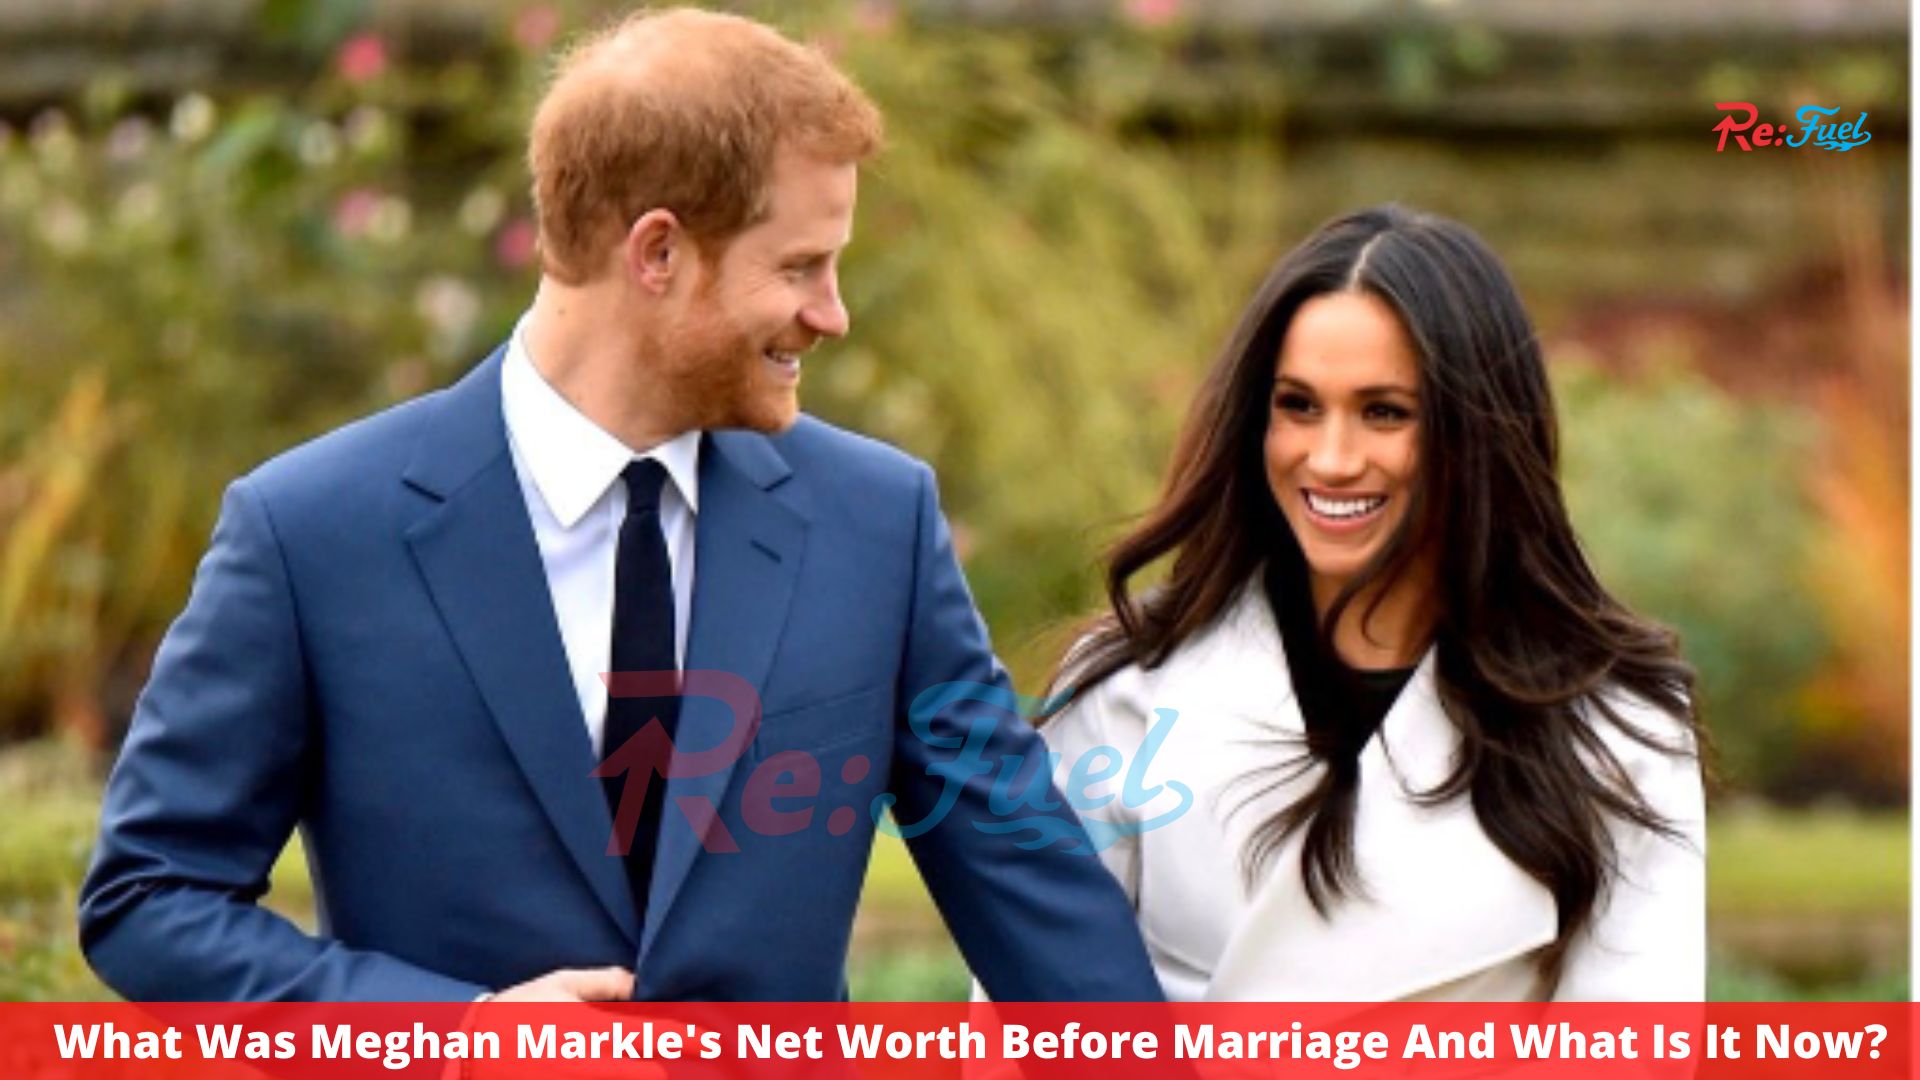 What Was Meghan Markle's Net Worth Before Marriage And What Is It Now?